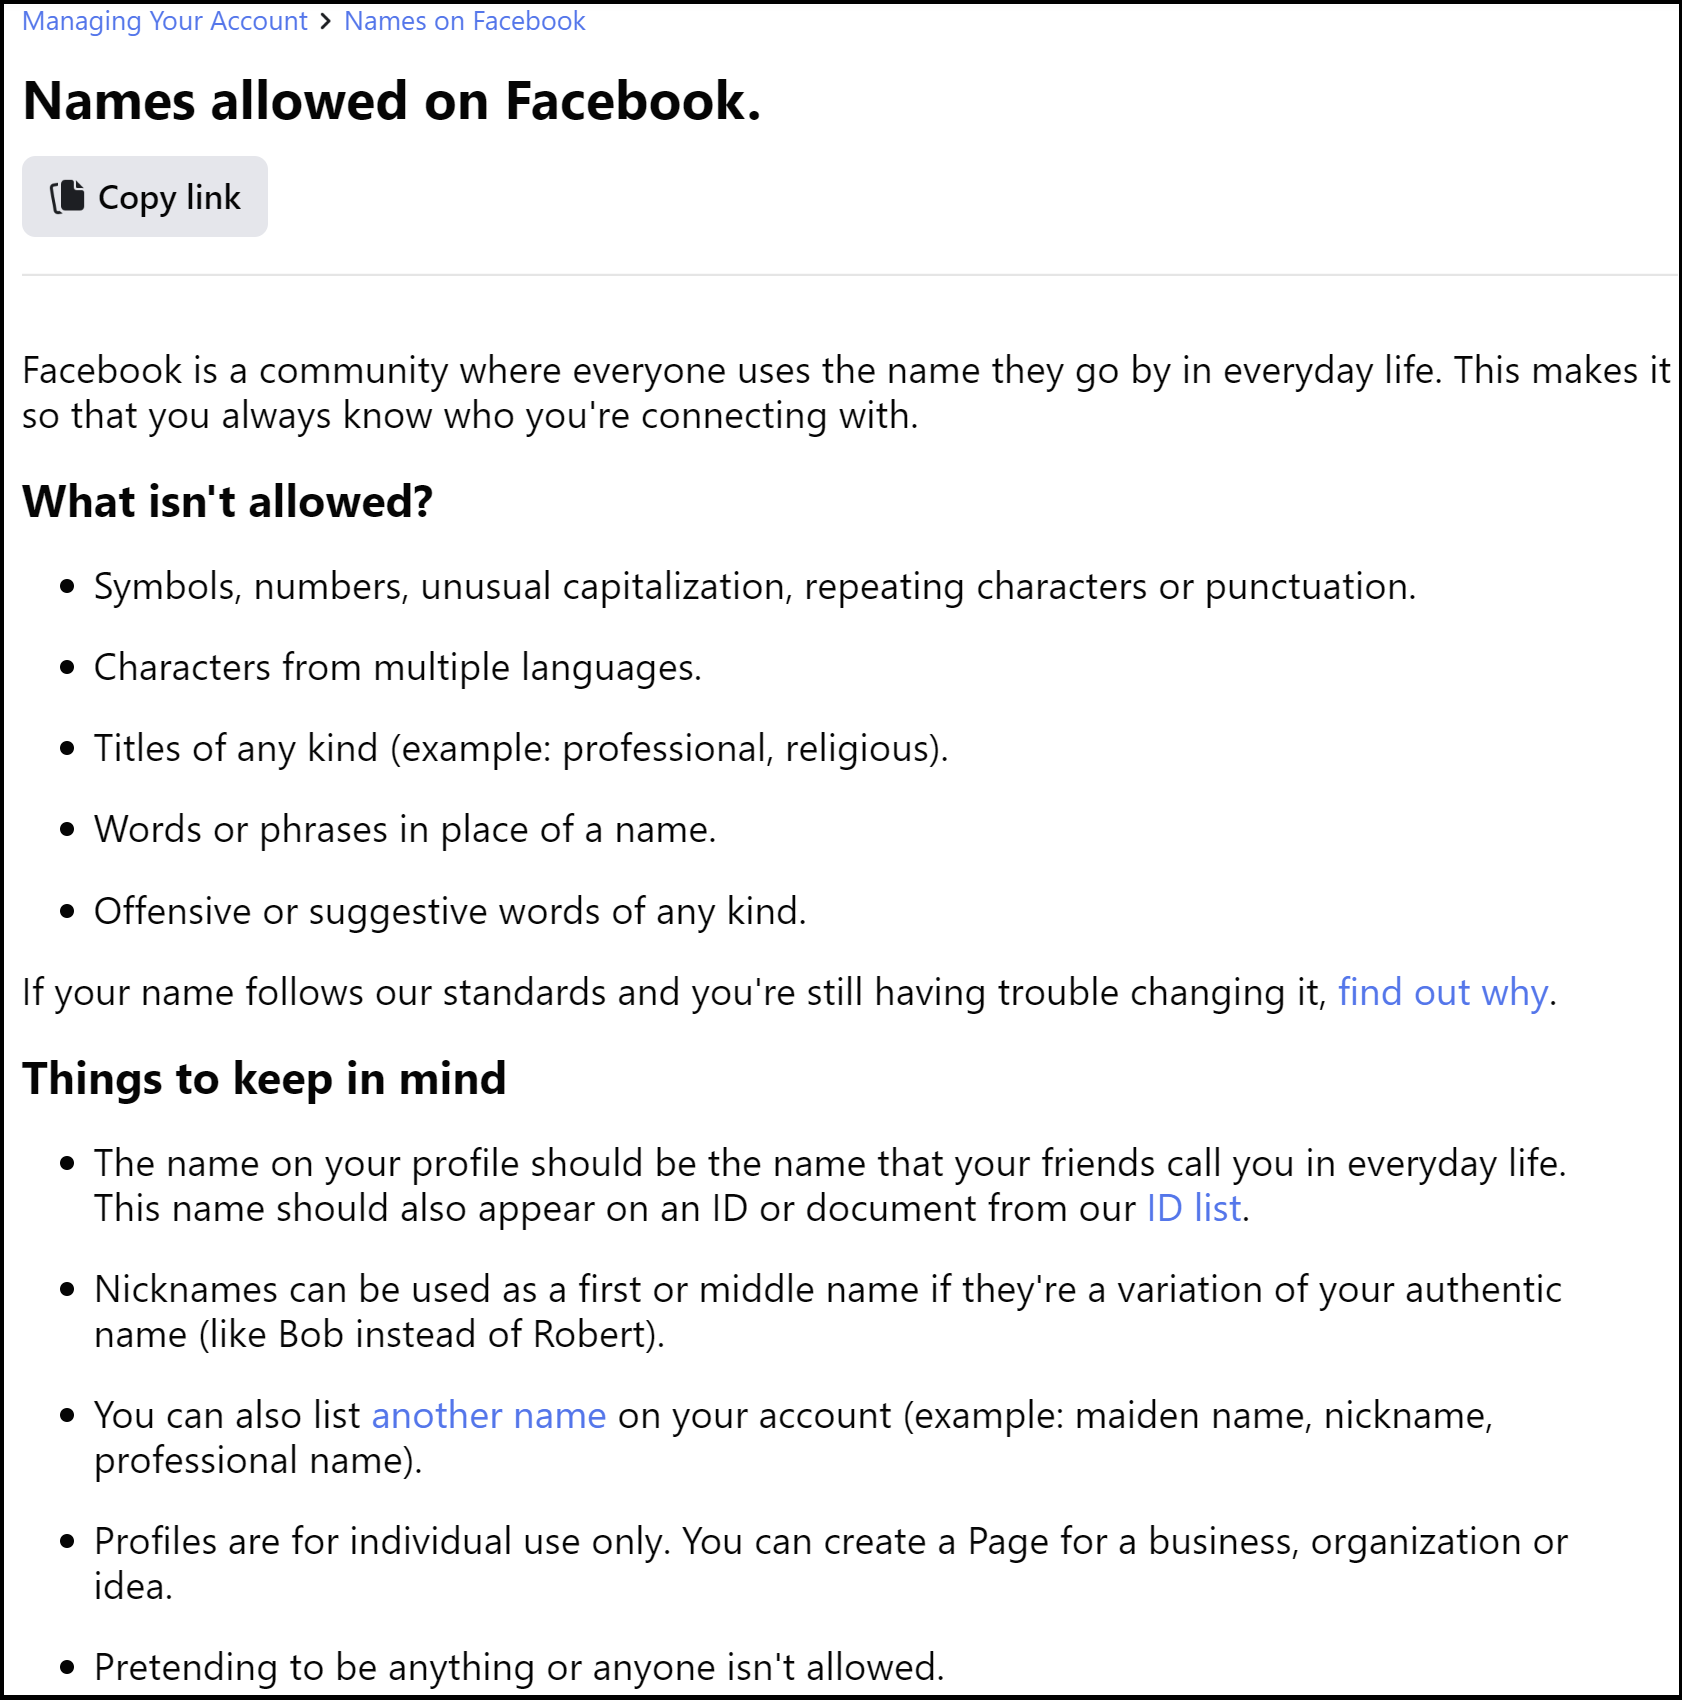 A screenshot of Facebook's name policy, which in this screenshot reads as follows: Names allowed on Facebook. Facebook is a community where everyone uses the name they go by in everyday life. This makes it so that you always know who you're connecting with. What isn't allowed? • Symbols, numbers, unusual capitalization, repeating characters or punctuation. • Characters from multiple languages. • Titles of any kind (example: professional, religious). • Words or phrases in place of a name. • Offensive or suggestive words of any kind. If your name follows our standards and you're still having trouble changing it, find out why. Things to keep in mind • The name on your profile should be the name that your friends call you in everyday life. This name should also appear on an ID or • document from our ID list. • Nicknames can be used as a first or middle name if they're a variation of your authentic name (like Bob instead of Robert). • You can also list another name on your account (example: maiden name, nickname, professional name). • Profiles are for individual use only. You can create a Page for a business, organization or idea. • Pretending to be anything or anyone isn't allowed.